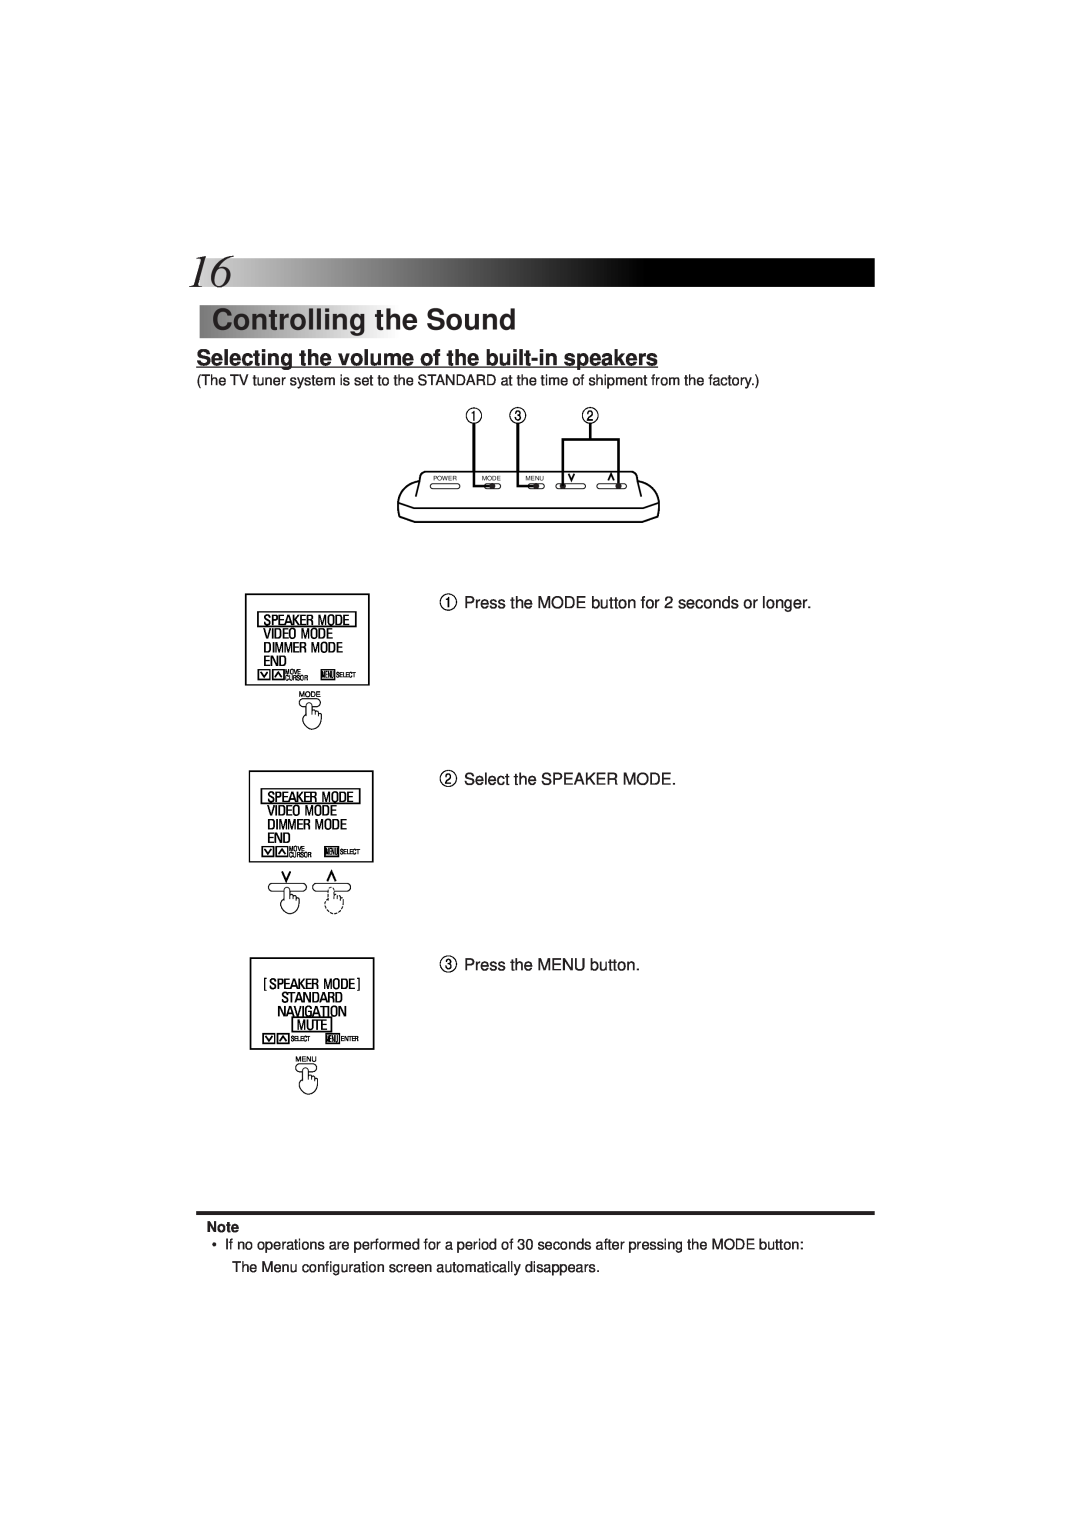 JVC KV-C1 manual Controllingthe Sound, Selecting the volume of the built-in speakers 